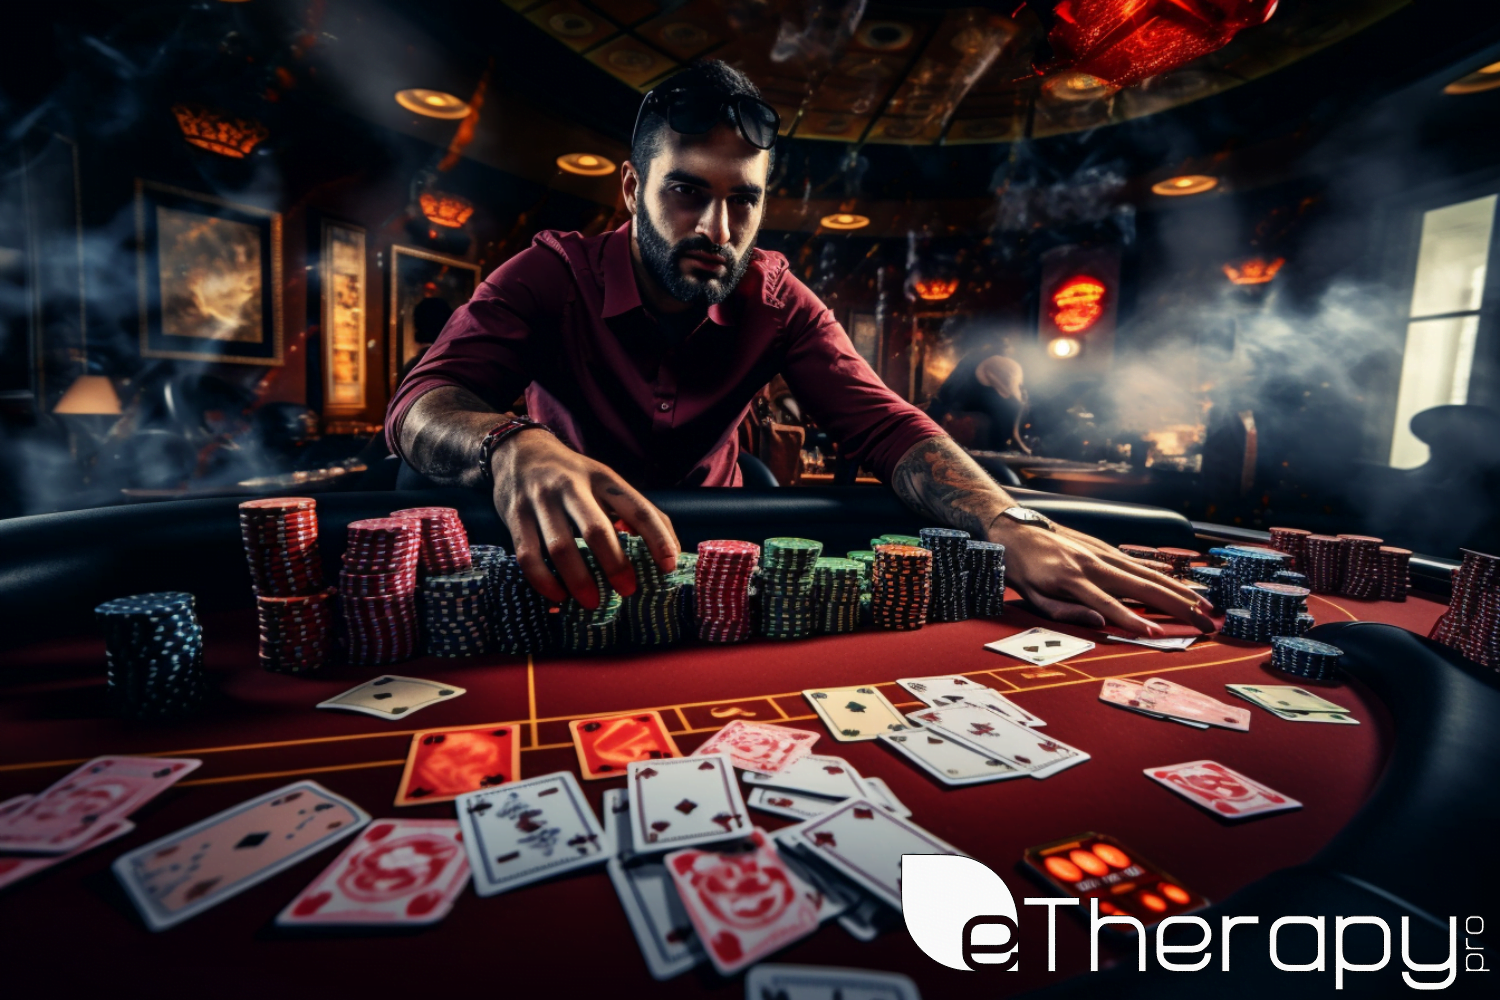 A person at a casino table, chips and cards spread out, capturing the moment of making a risky bet -